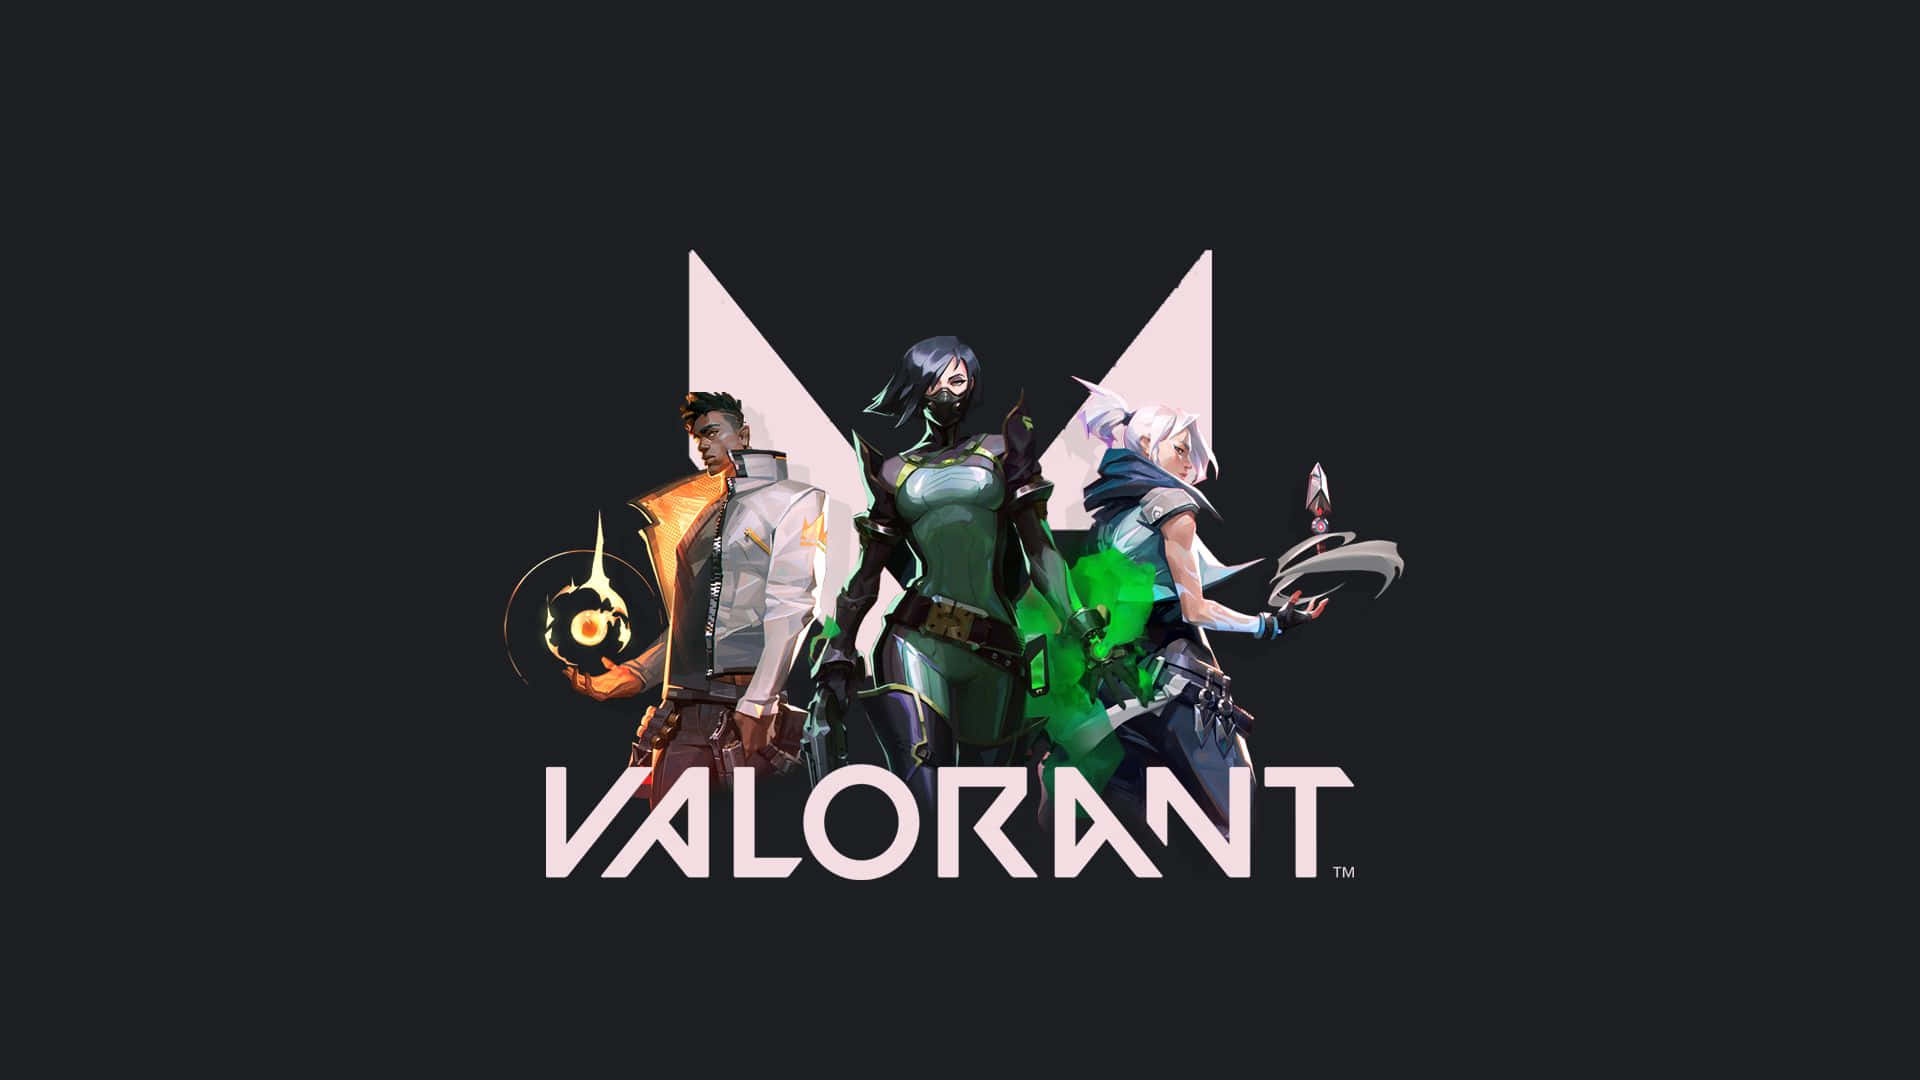 Take Aim: A Player's View of Valorant 1920x1080 Wallpaper